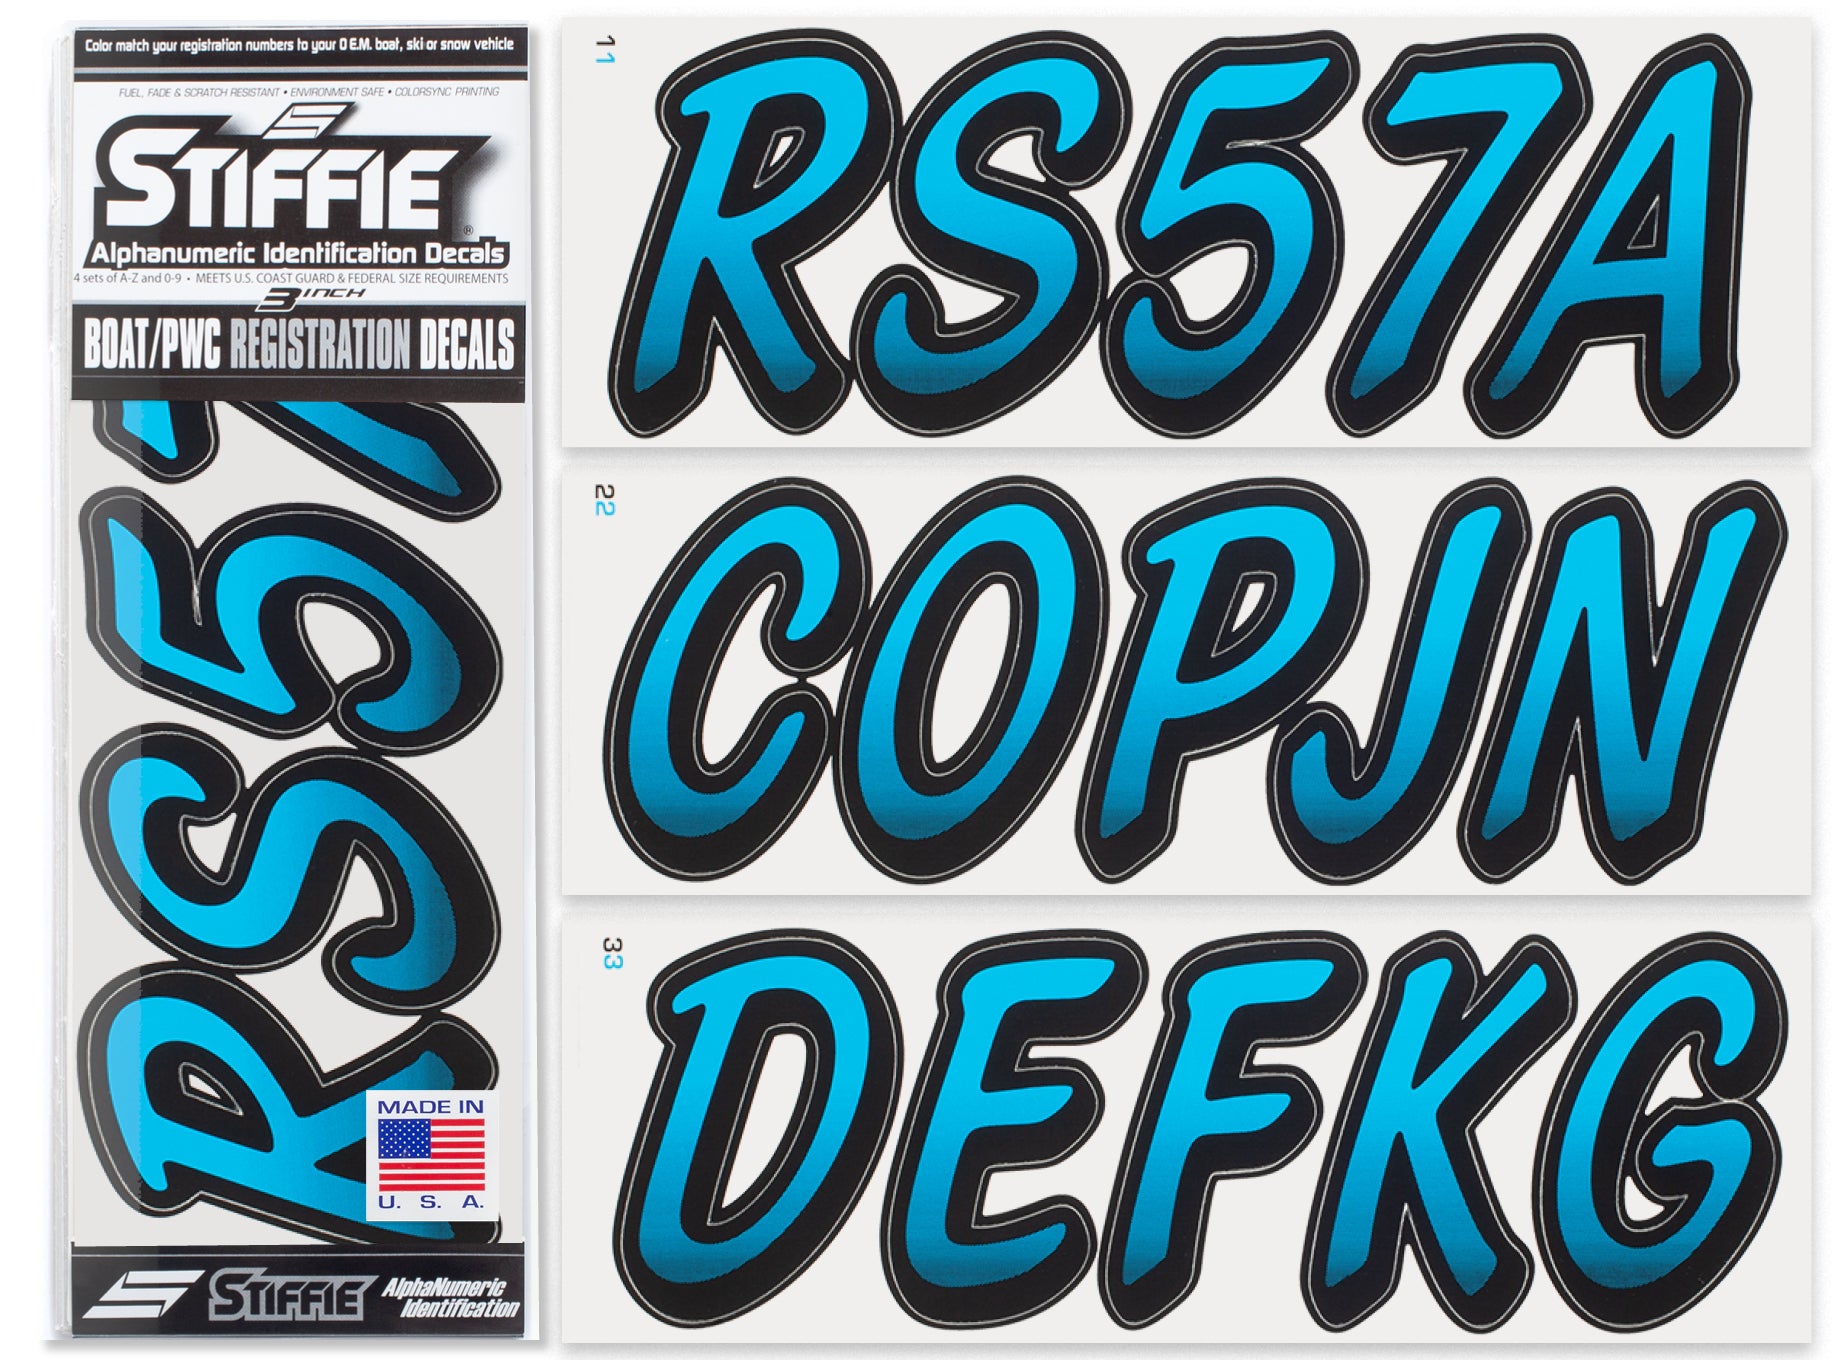 STIFFIE Whipline Sky Blue/Black 3" Alpha-Numeric Registration Identification Numbers Stickers Decals for Boats & Personal Watercraft